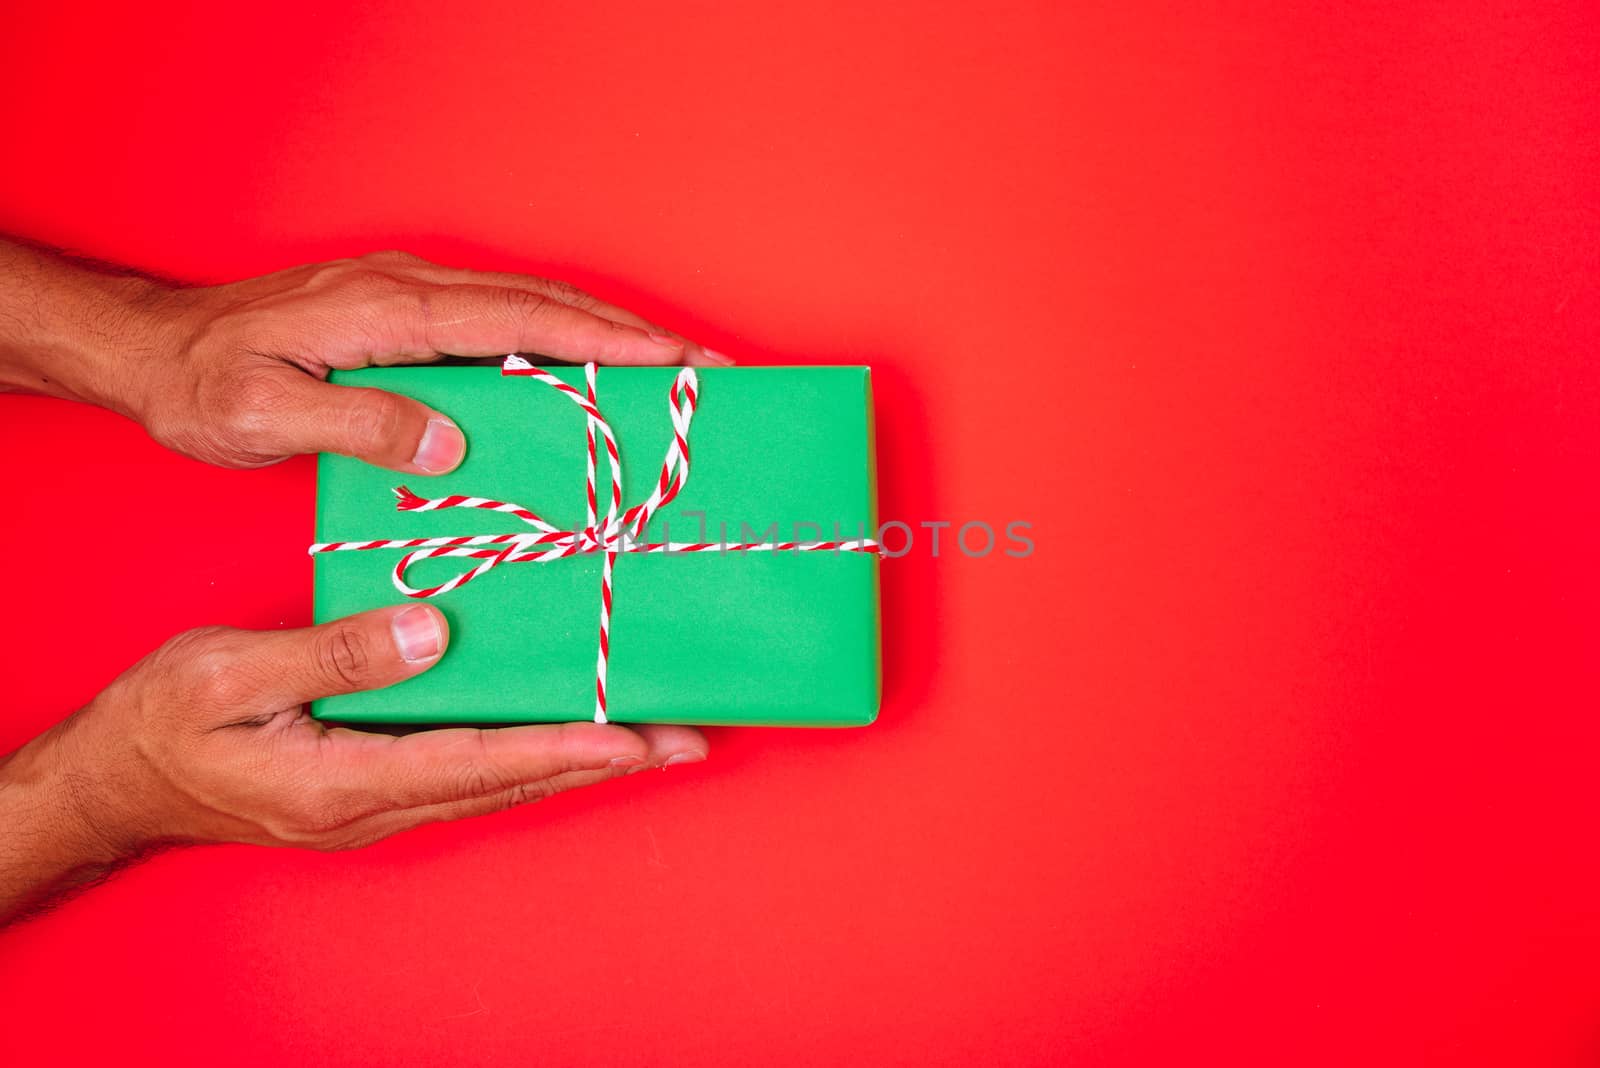 Happy New Year and Christmas 2020 or valentine day, top view hands with green gift box on red background with copy space for your text